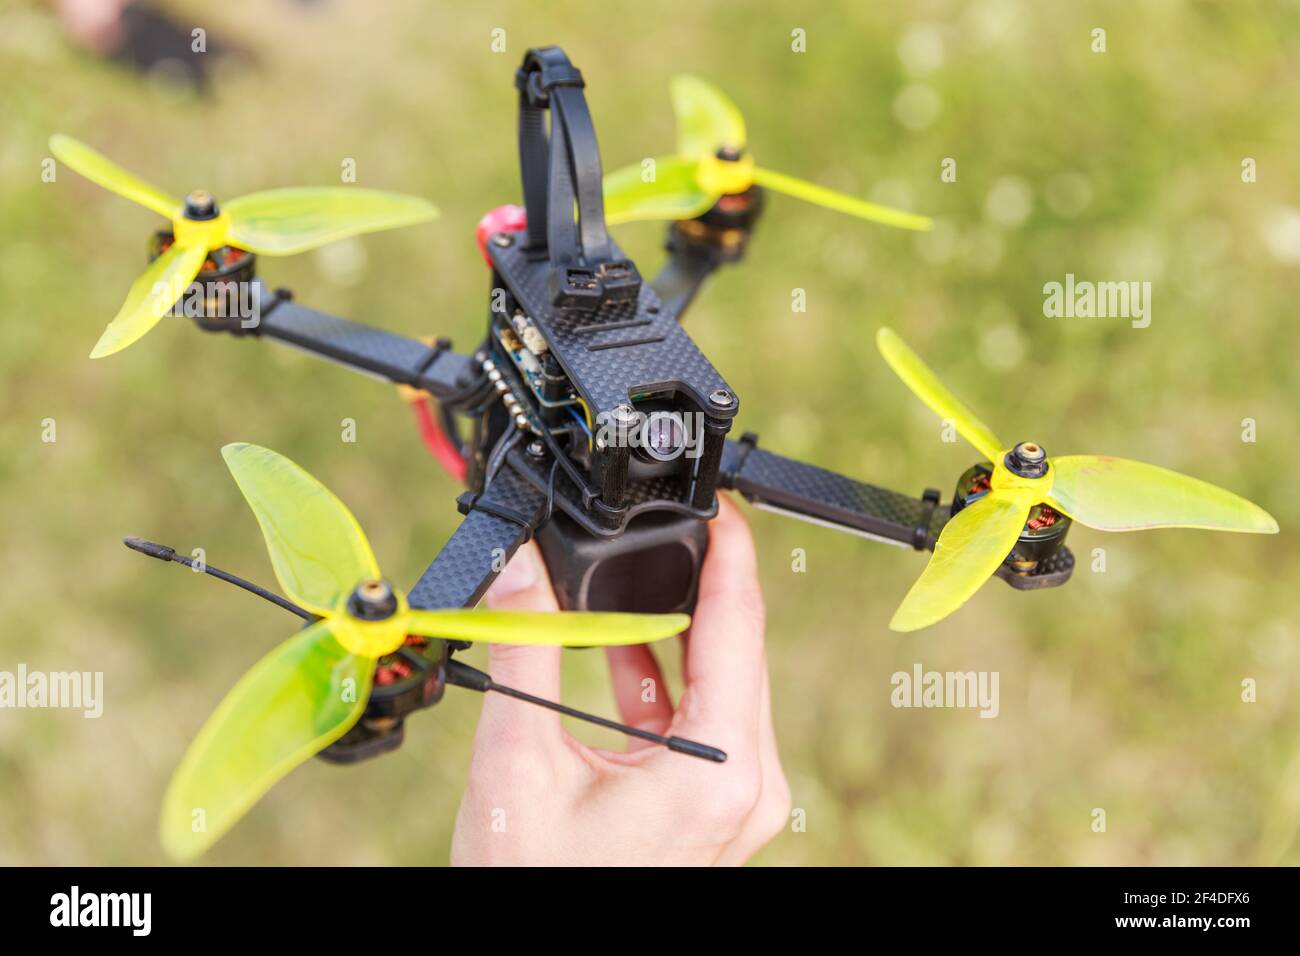 A fpv high-speed racing drone copter lying on a hand Stock Photo - Alamy